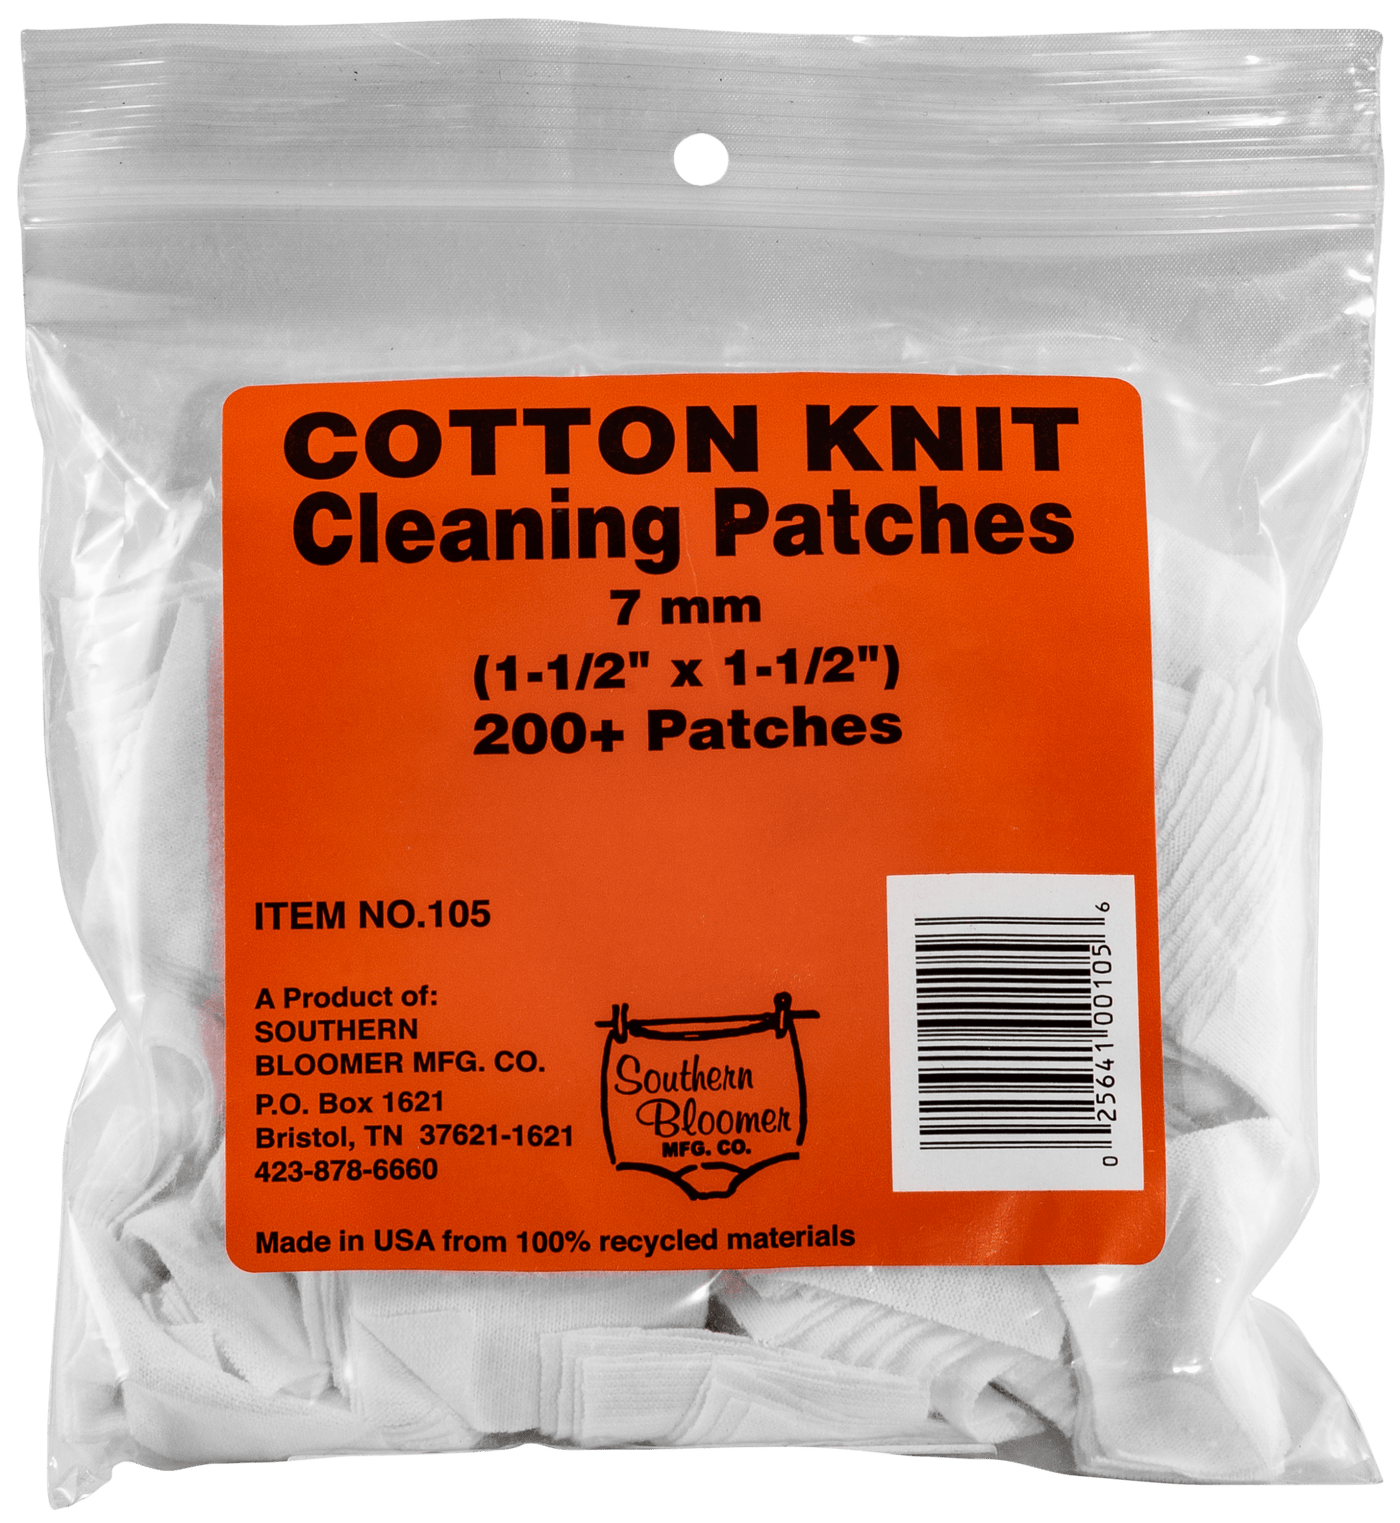 Southern Bloomer Southern Bloomer Cleaning Patches, Sbc 105  7mm Cal Patches         200 Ct Gun Care